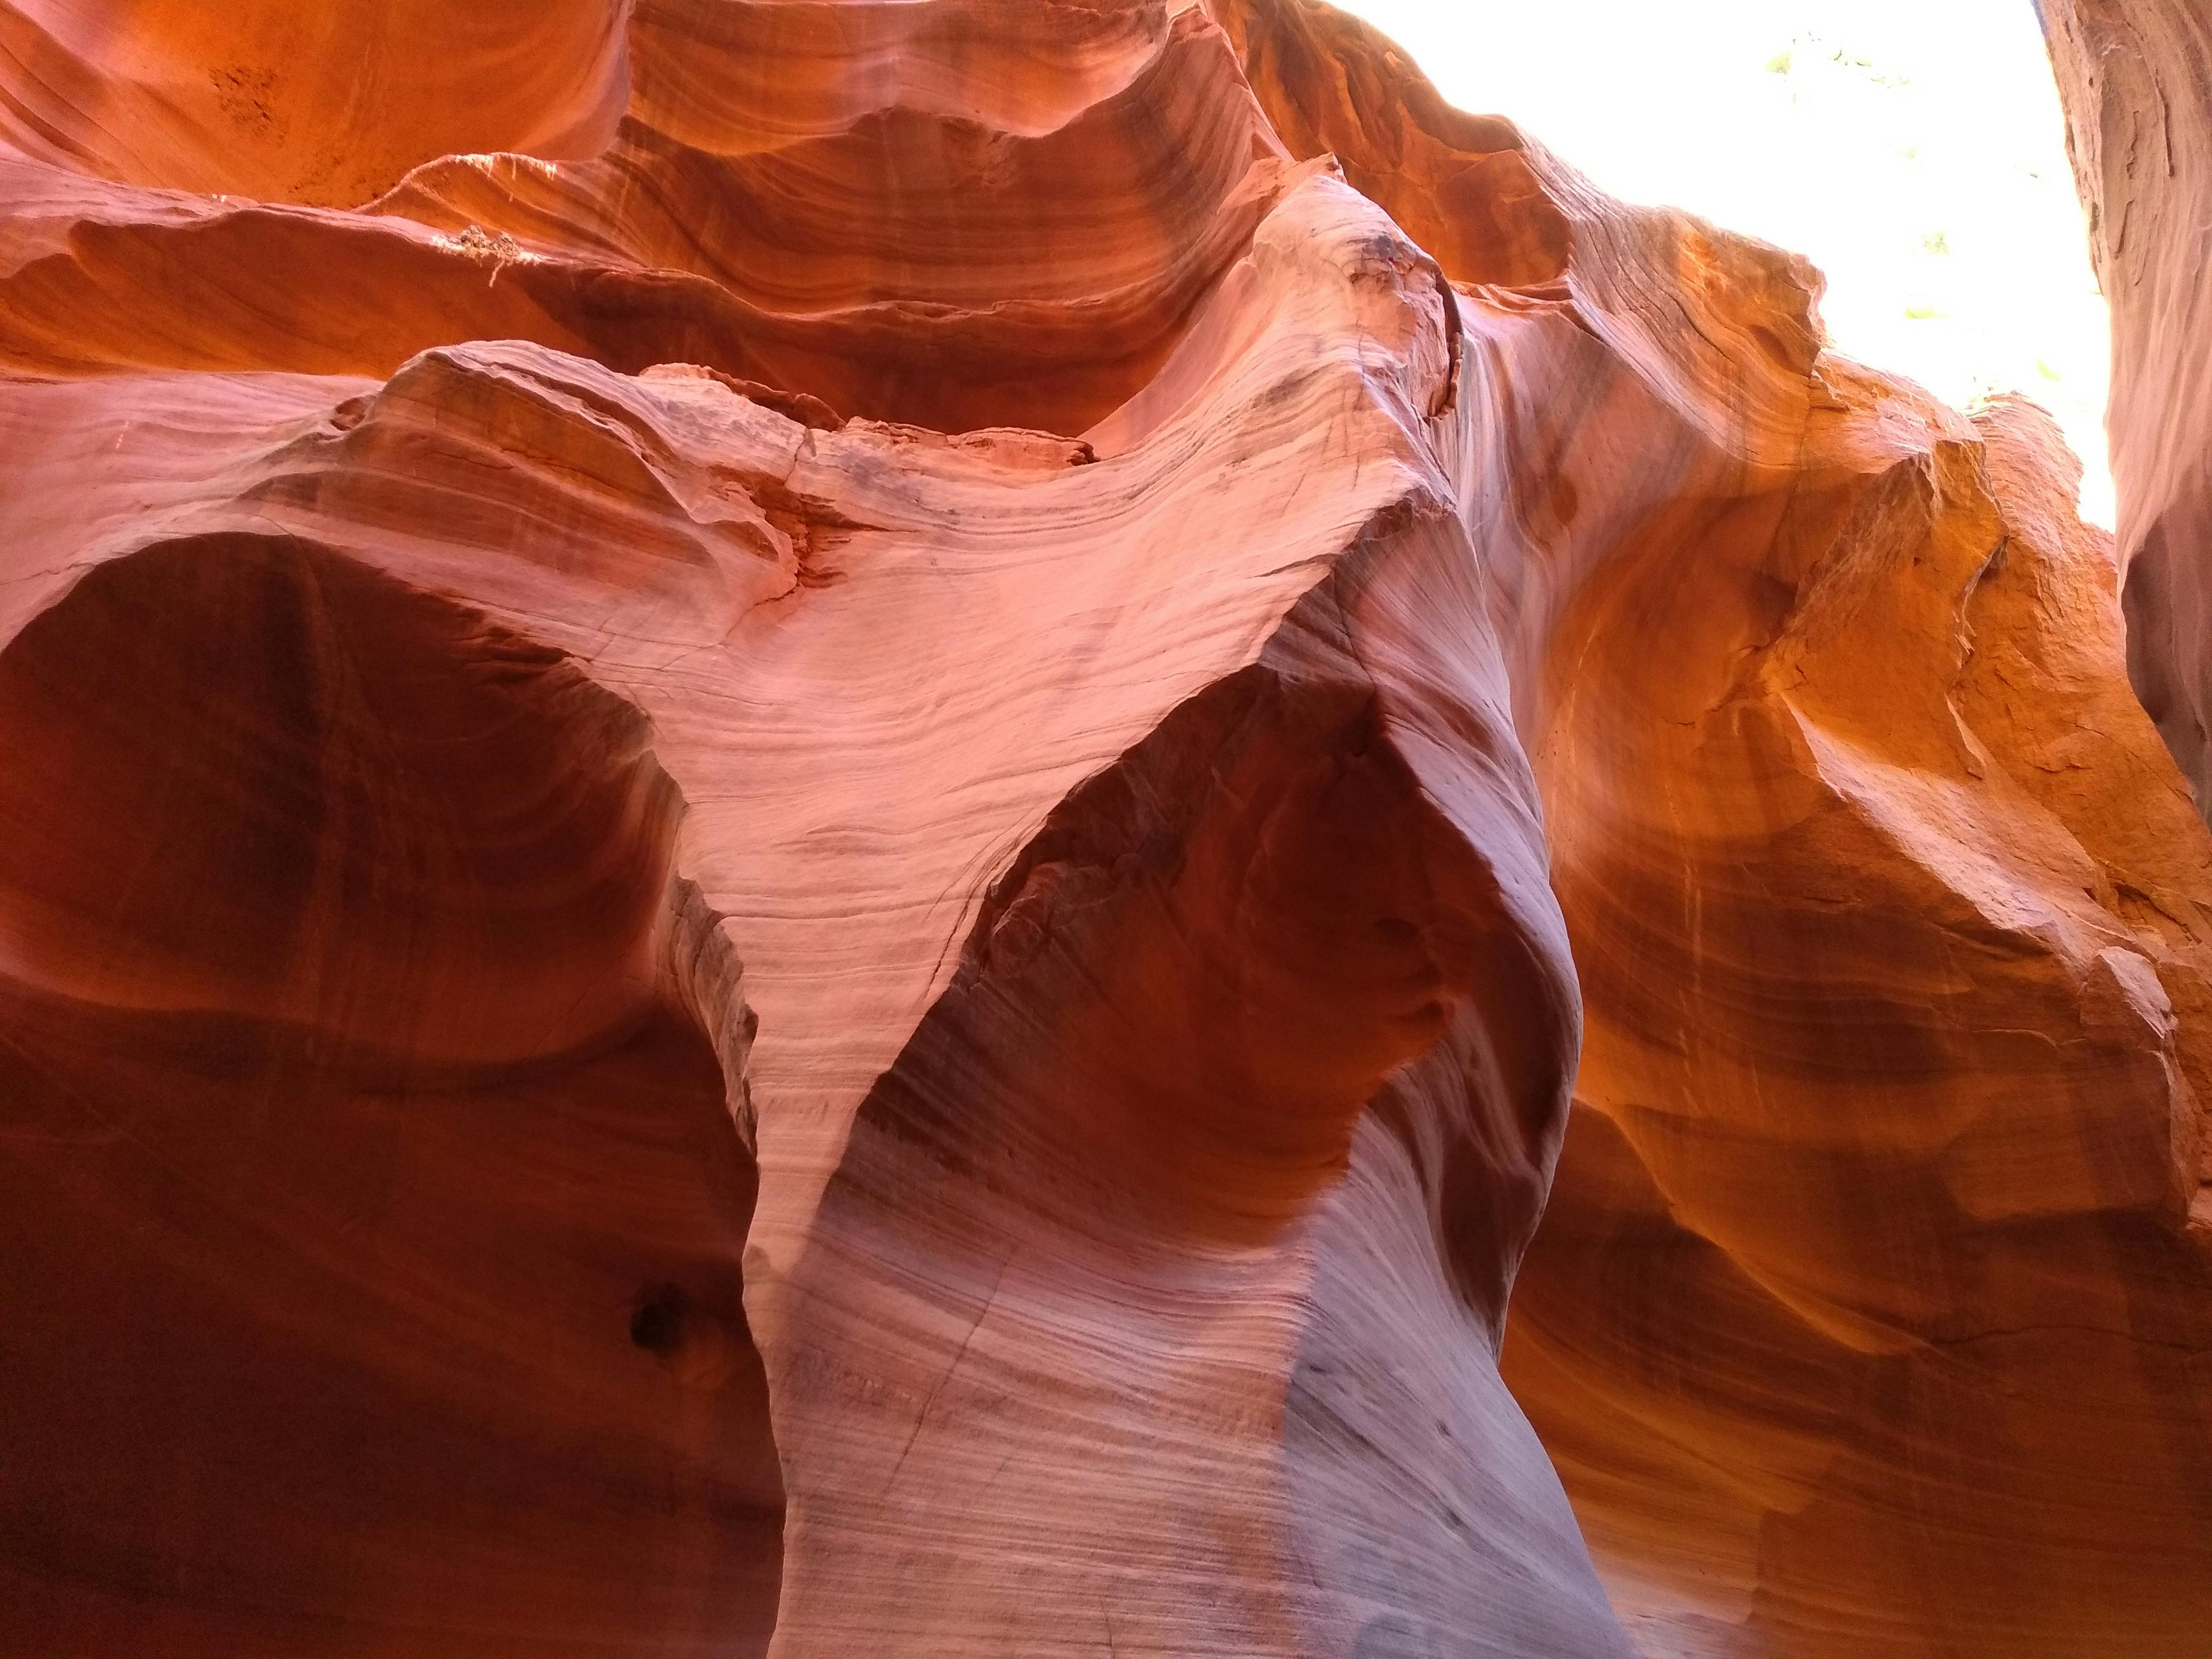 Lower Antelope Canyon and Horseshoe Bend tour from Las Vegas Musement